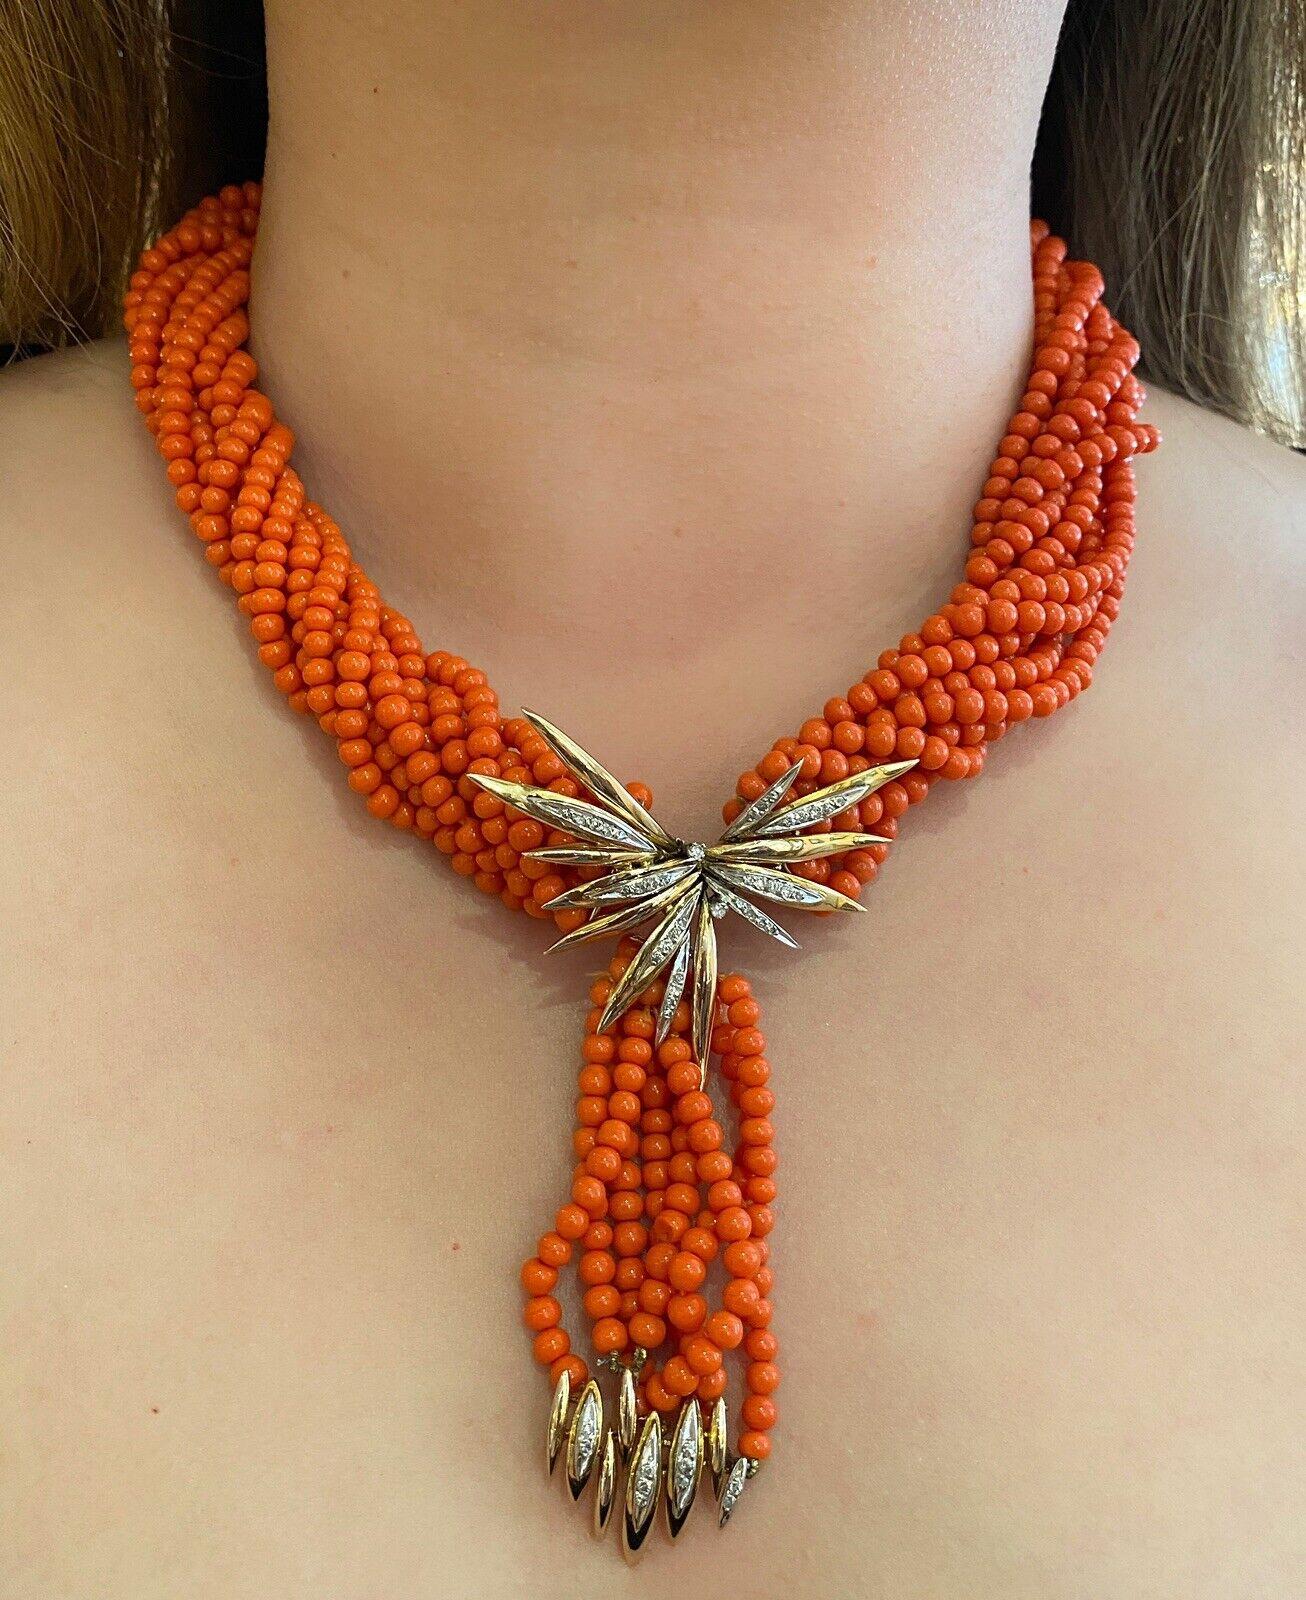 Vintage Multistrand Coral & Diamond Necklace in 14k Gold

Vintage Coral and Diamond Necklace features 10 strands of Orange Coral Beads, accented by a 14k Yellow and White Gold Starburst center clasp and tassel end piece with Single-cut